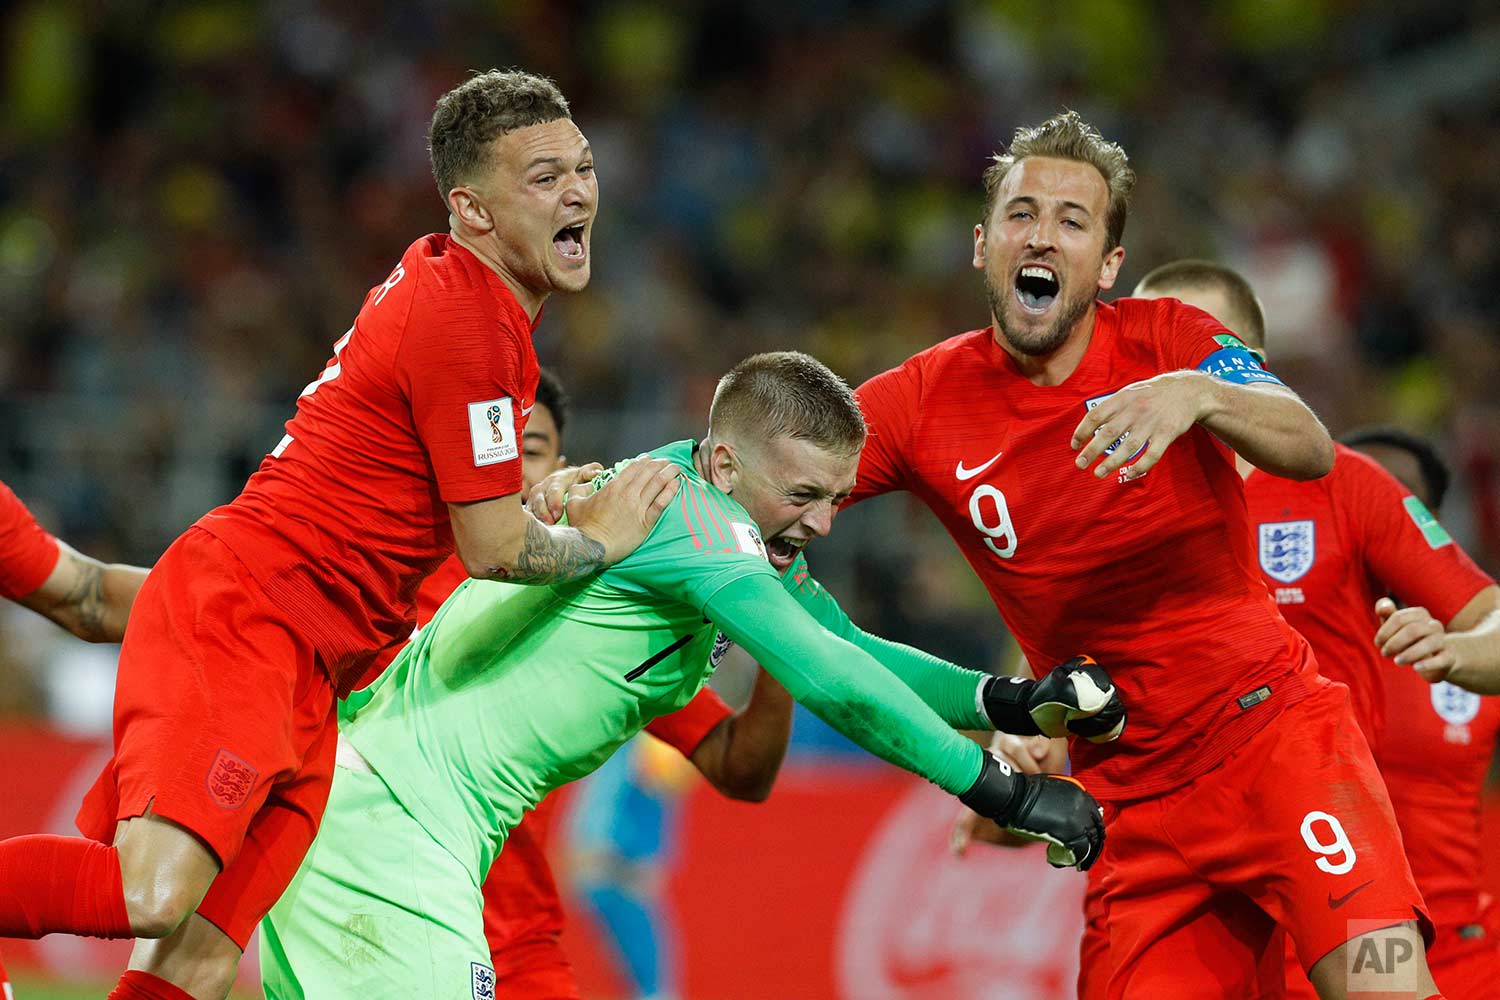  England's Harry Kane, right, goalkeeper Jordan Pickford, centre, and Kieran Trippier celebrate at the end of the round of 16 match between Colombia and England at the 2018 soccer World Cup in the Spartak Stadium, in Moscow, Russia, Tuesday, July 3, 